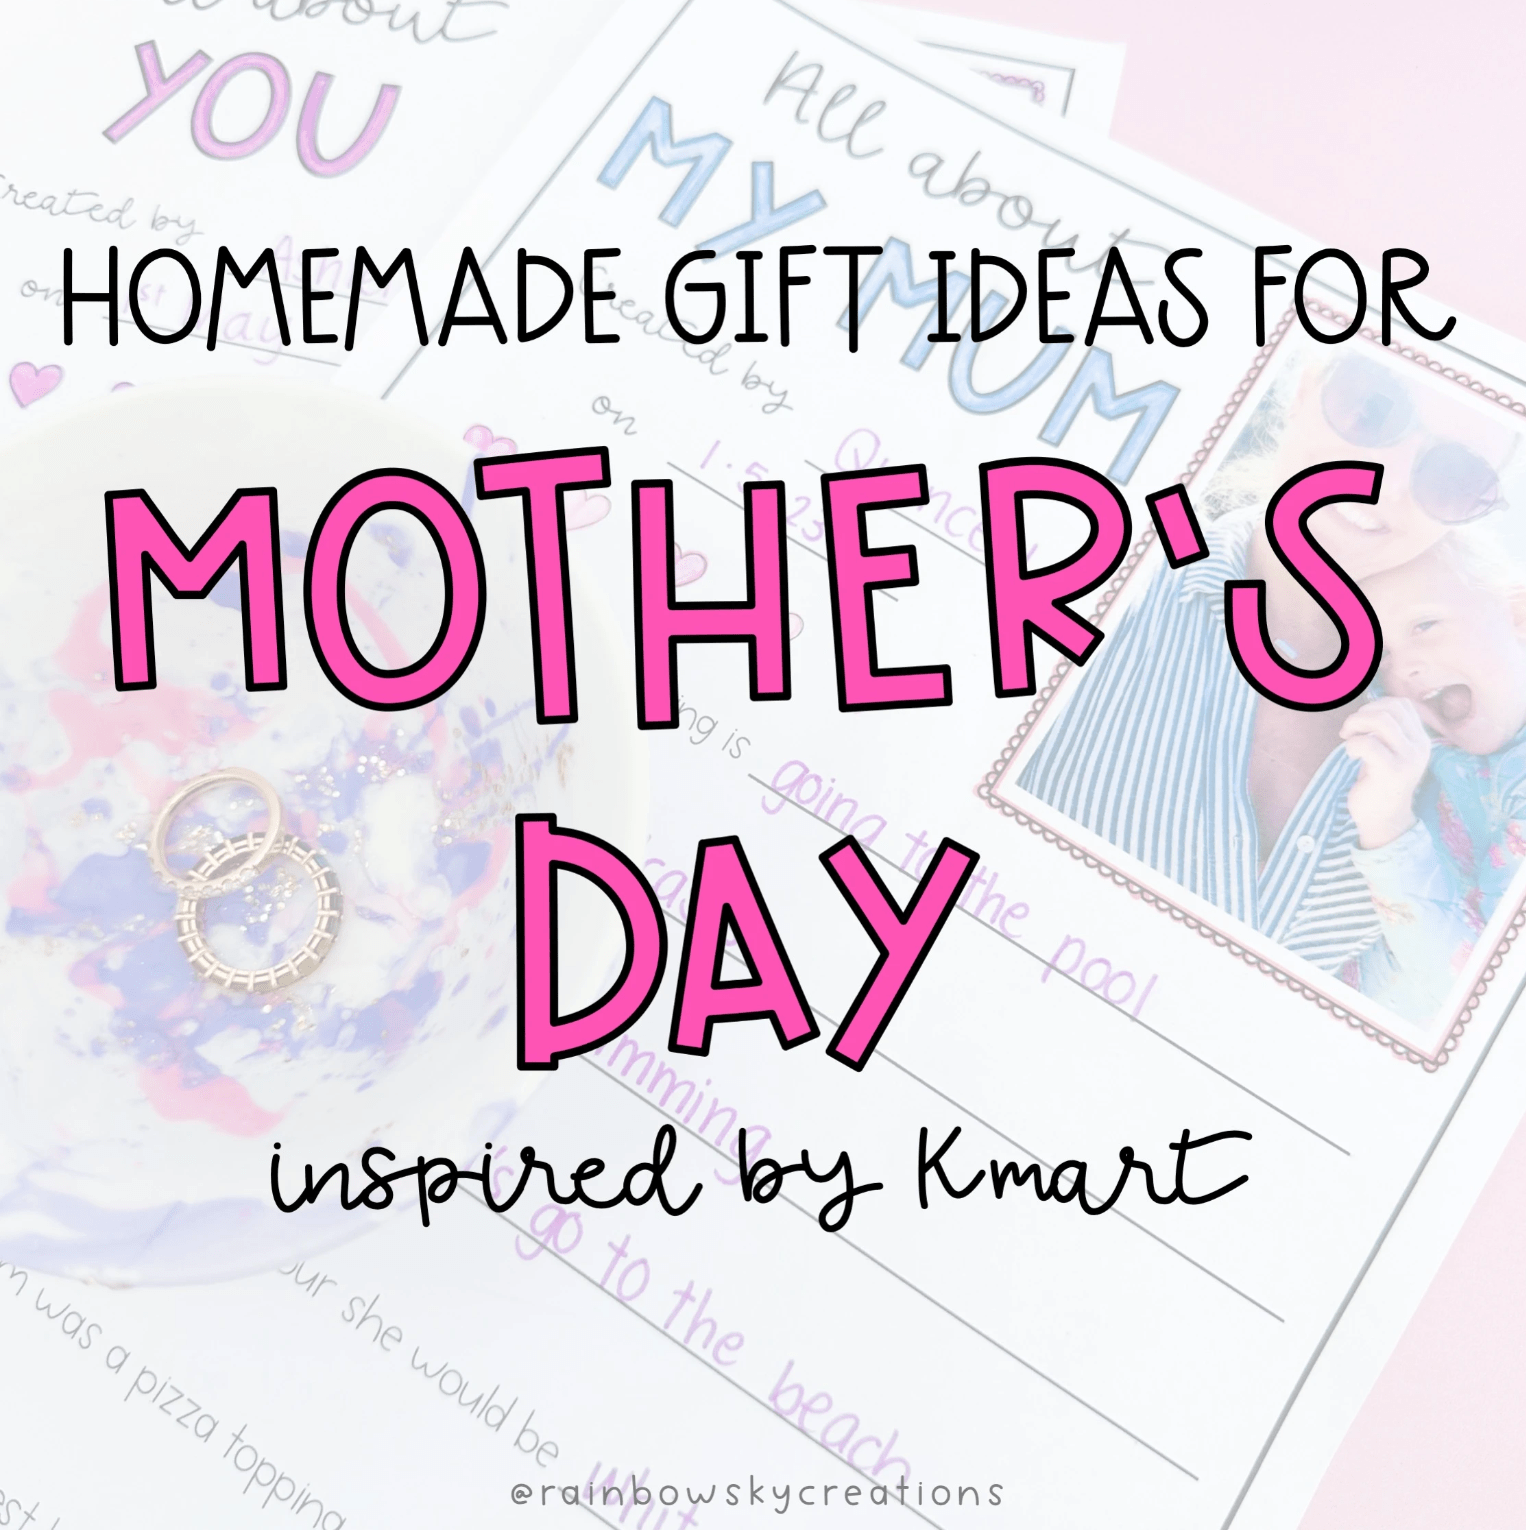 5 Mother’s Day Craft Ideas : Inspired By Kmart